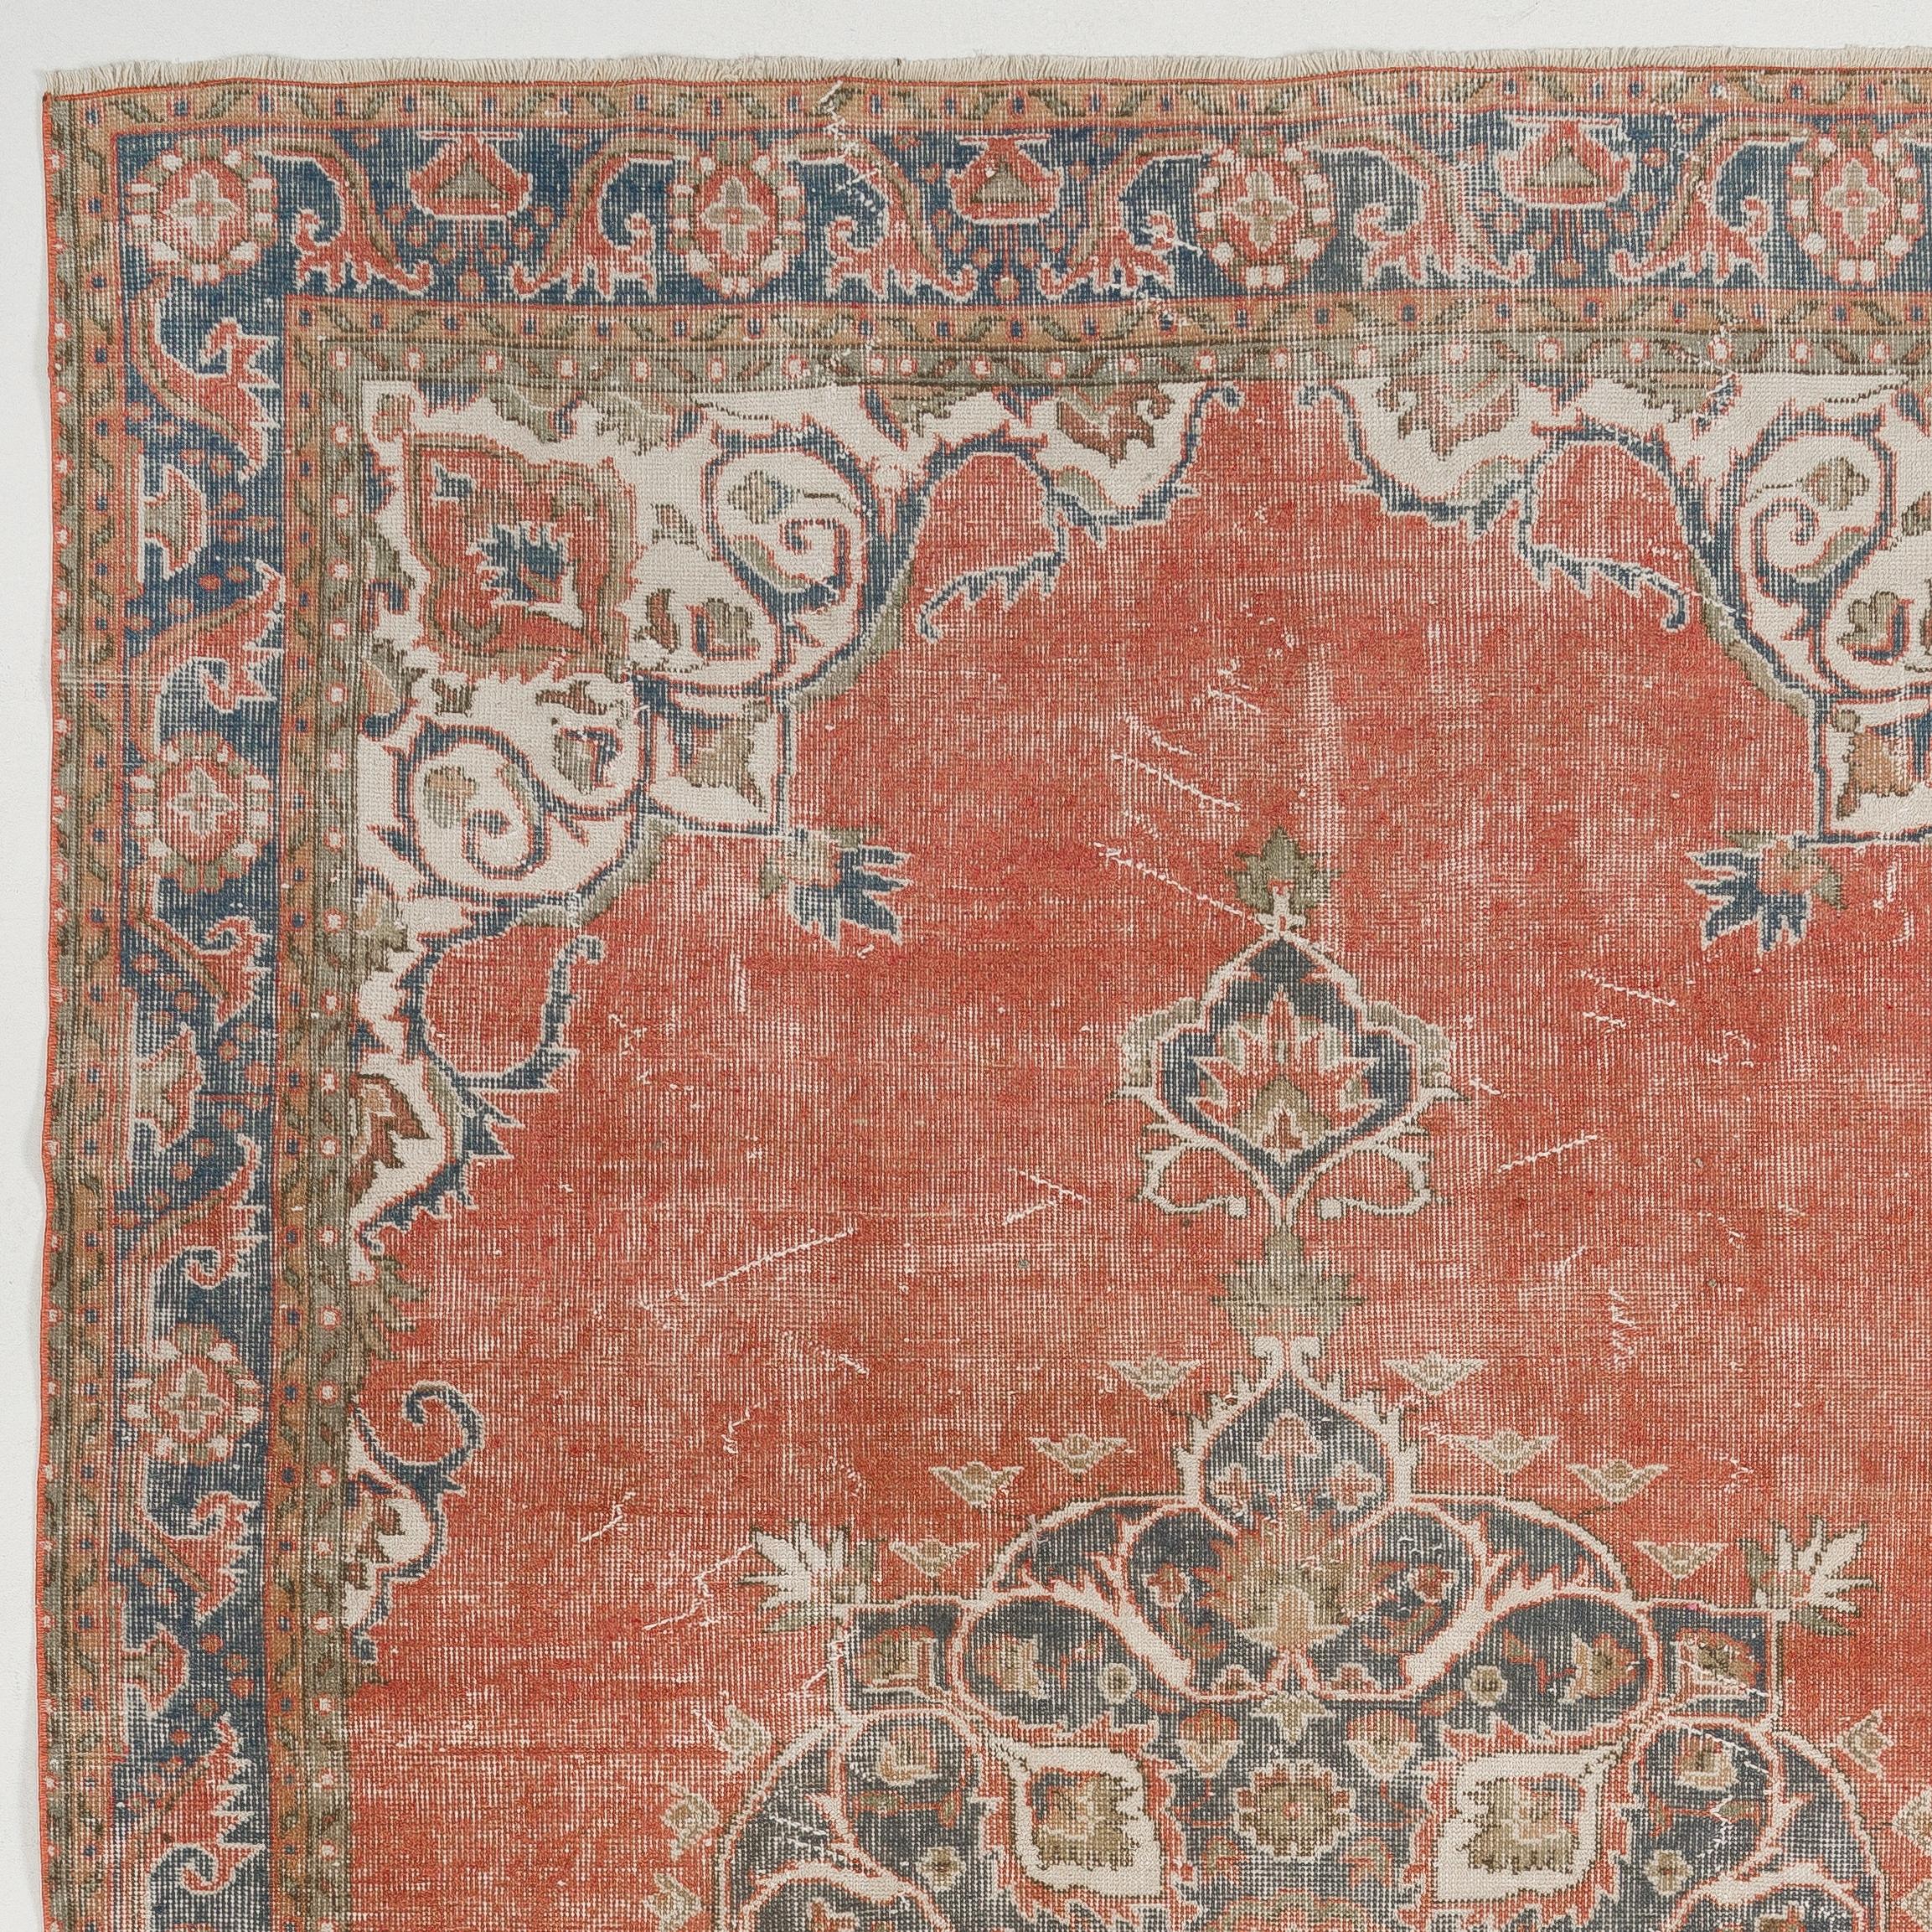 A fine vintage hand knotted Turkish Oushak rug from the 1960s featuring a central floral medallion in faded navy blue against a plain warm madder red field, finished off with spandrels in cream and a border in olive green and navy blue both filled